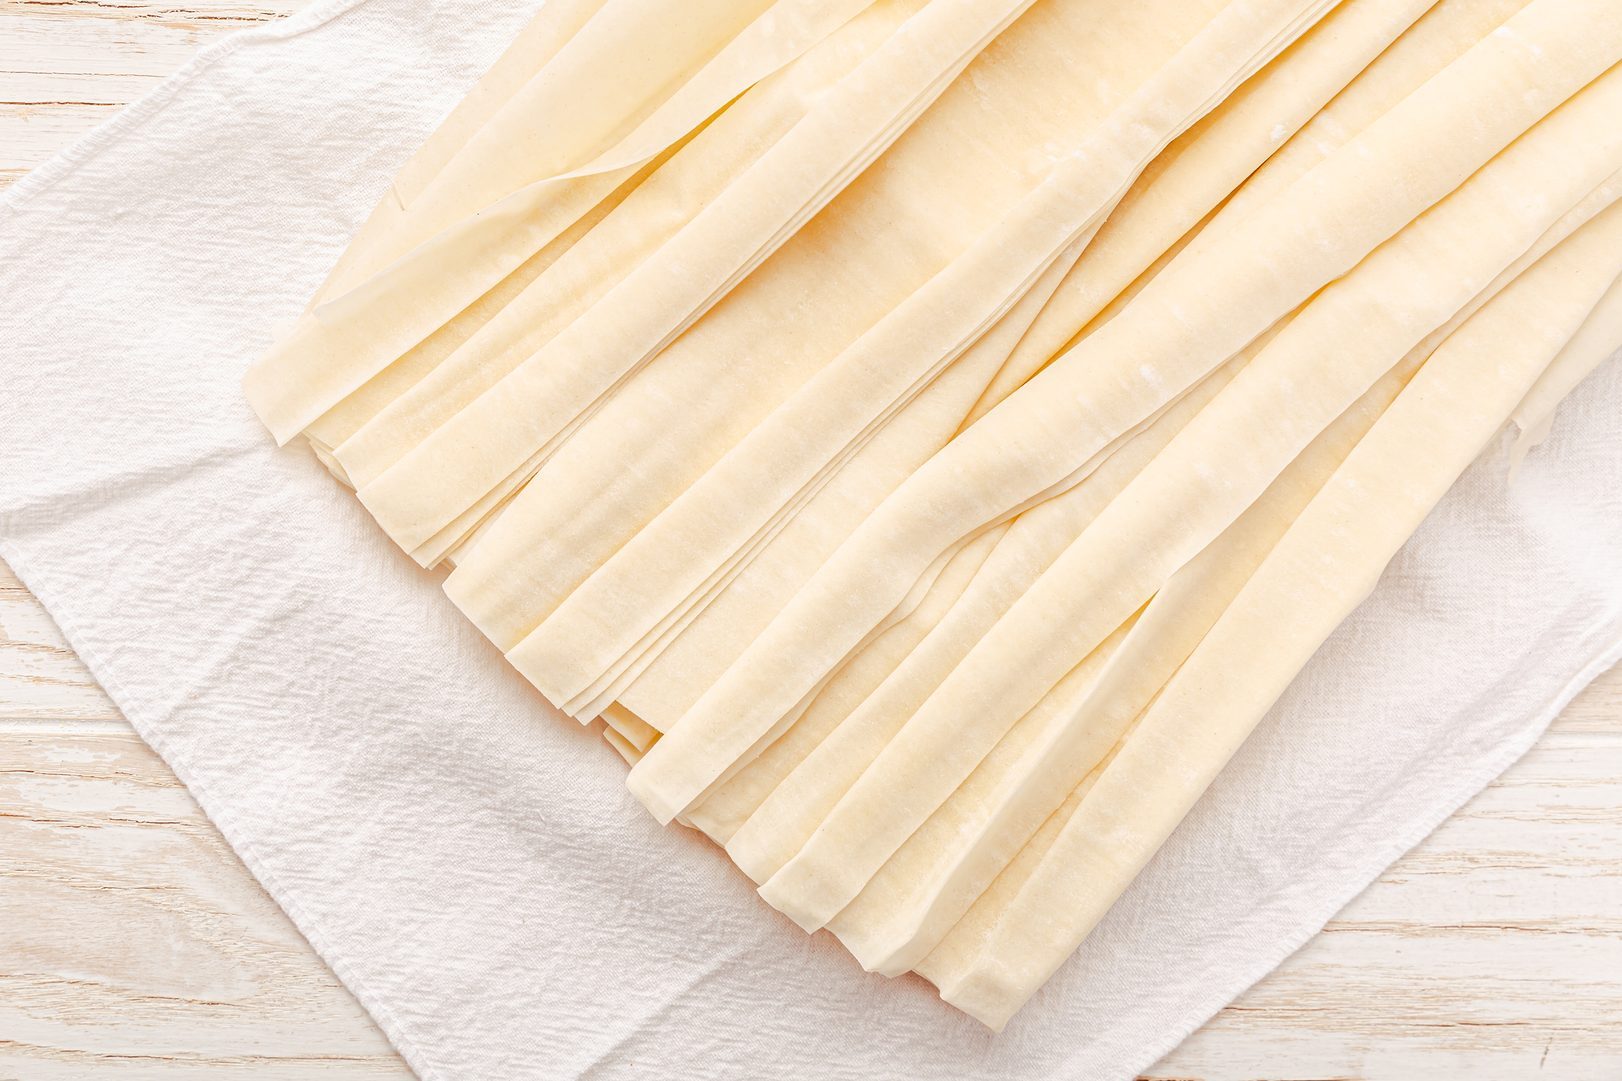 Raw phyllo pastry, thin filo dough for baking, for pie and cakes on wooden kitchen table